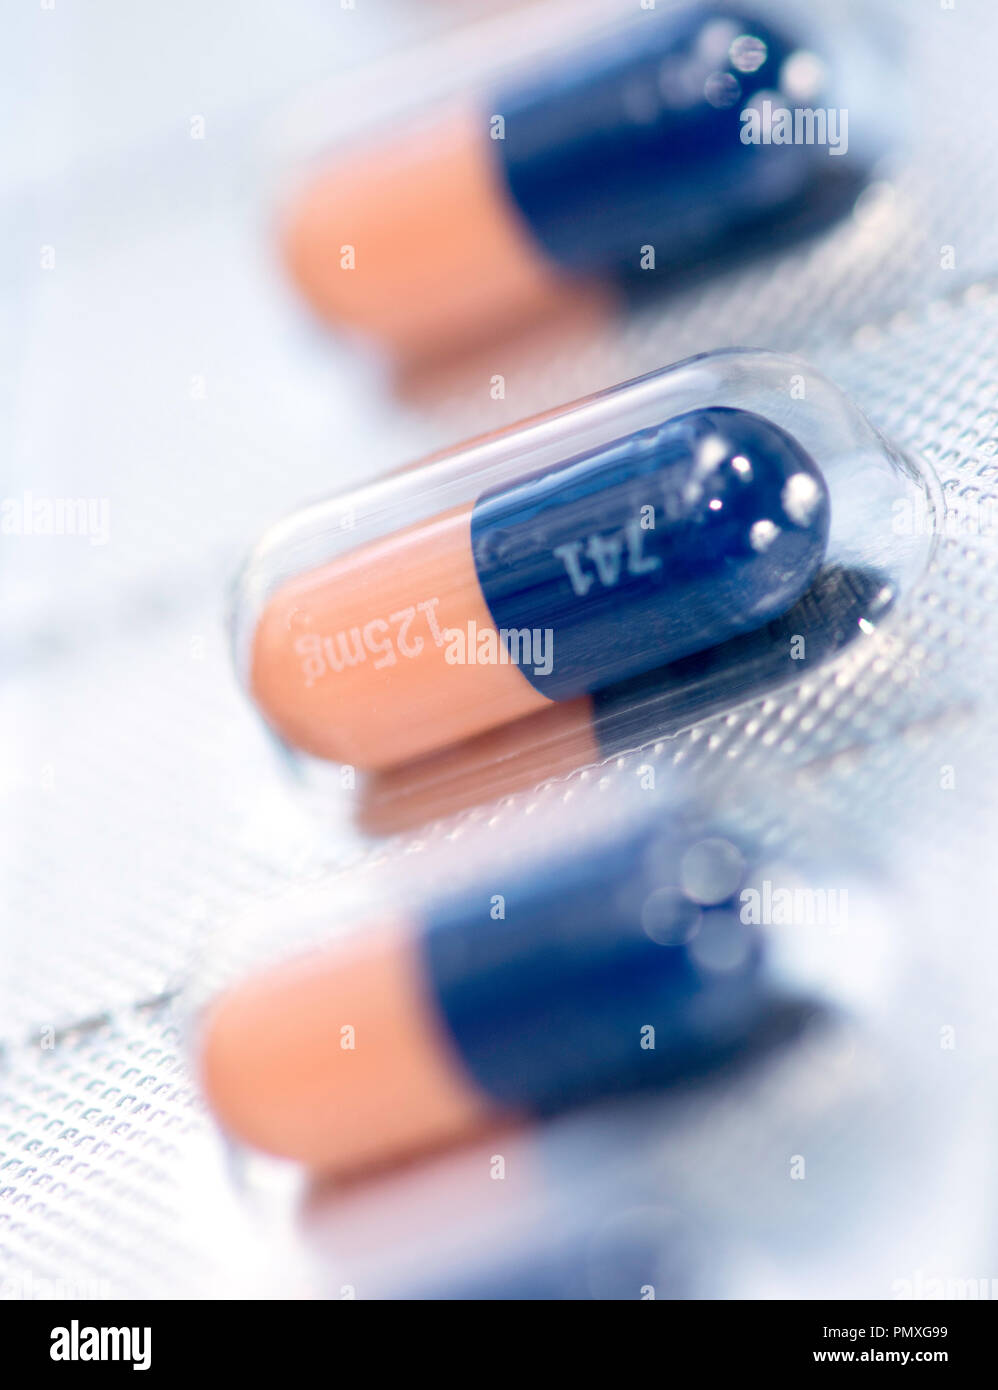 Vancomycin 125 mg. Oral antibiotic is a prescription medication used to treat Clostridium difficile and staph infections. Stock Photo